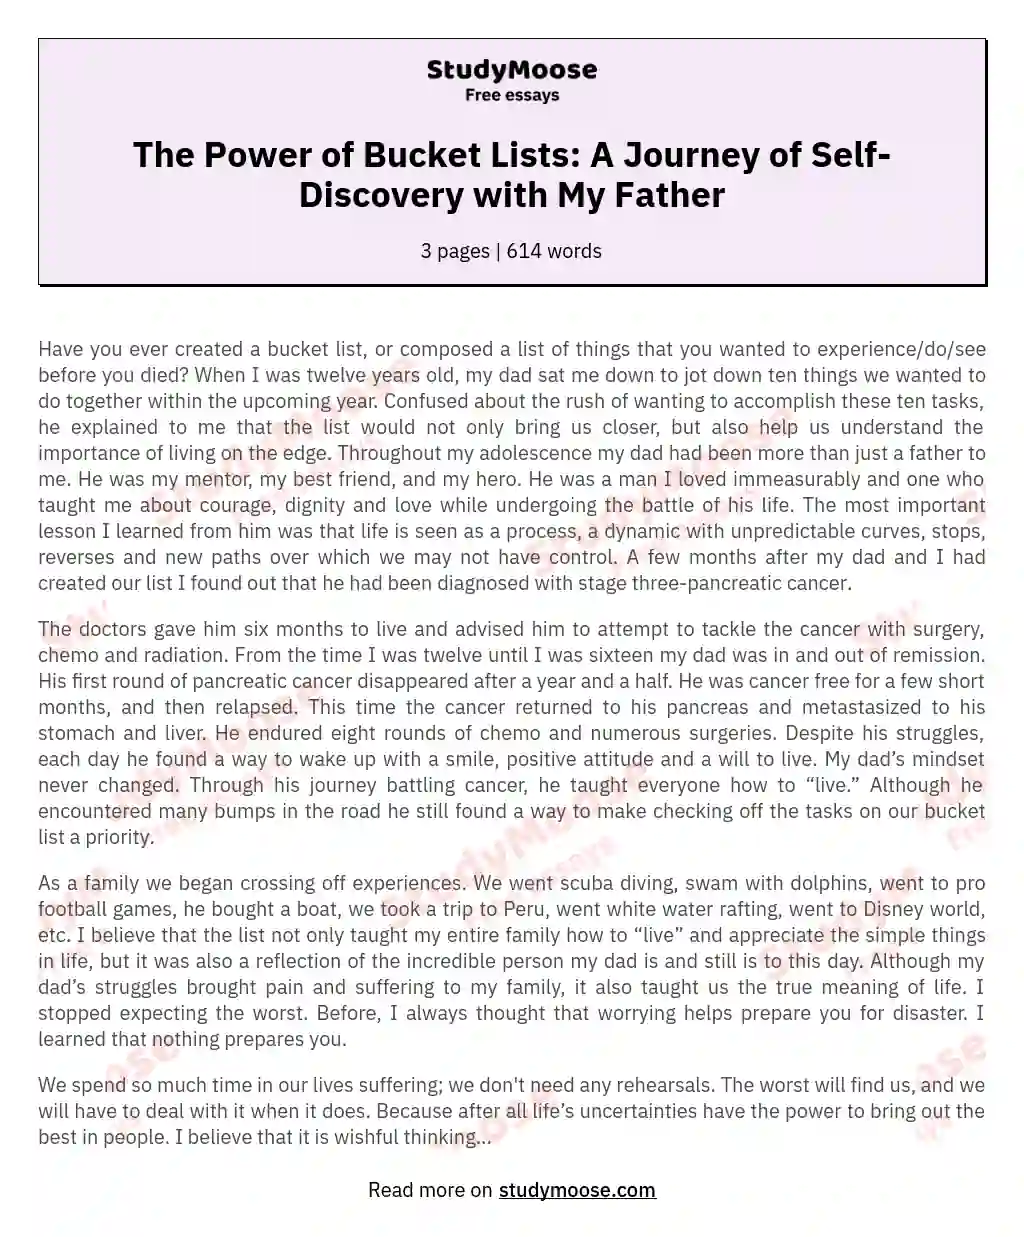 The Power of Bucket Lists: A Journey of Self-Discovery with My Father essay